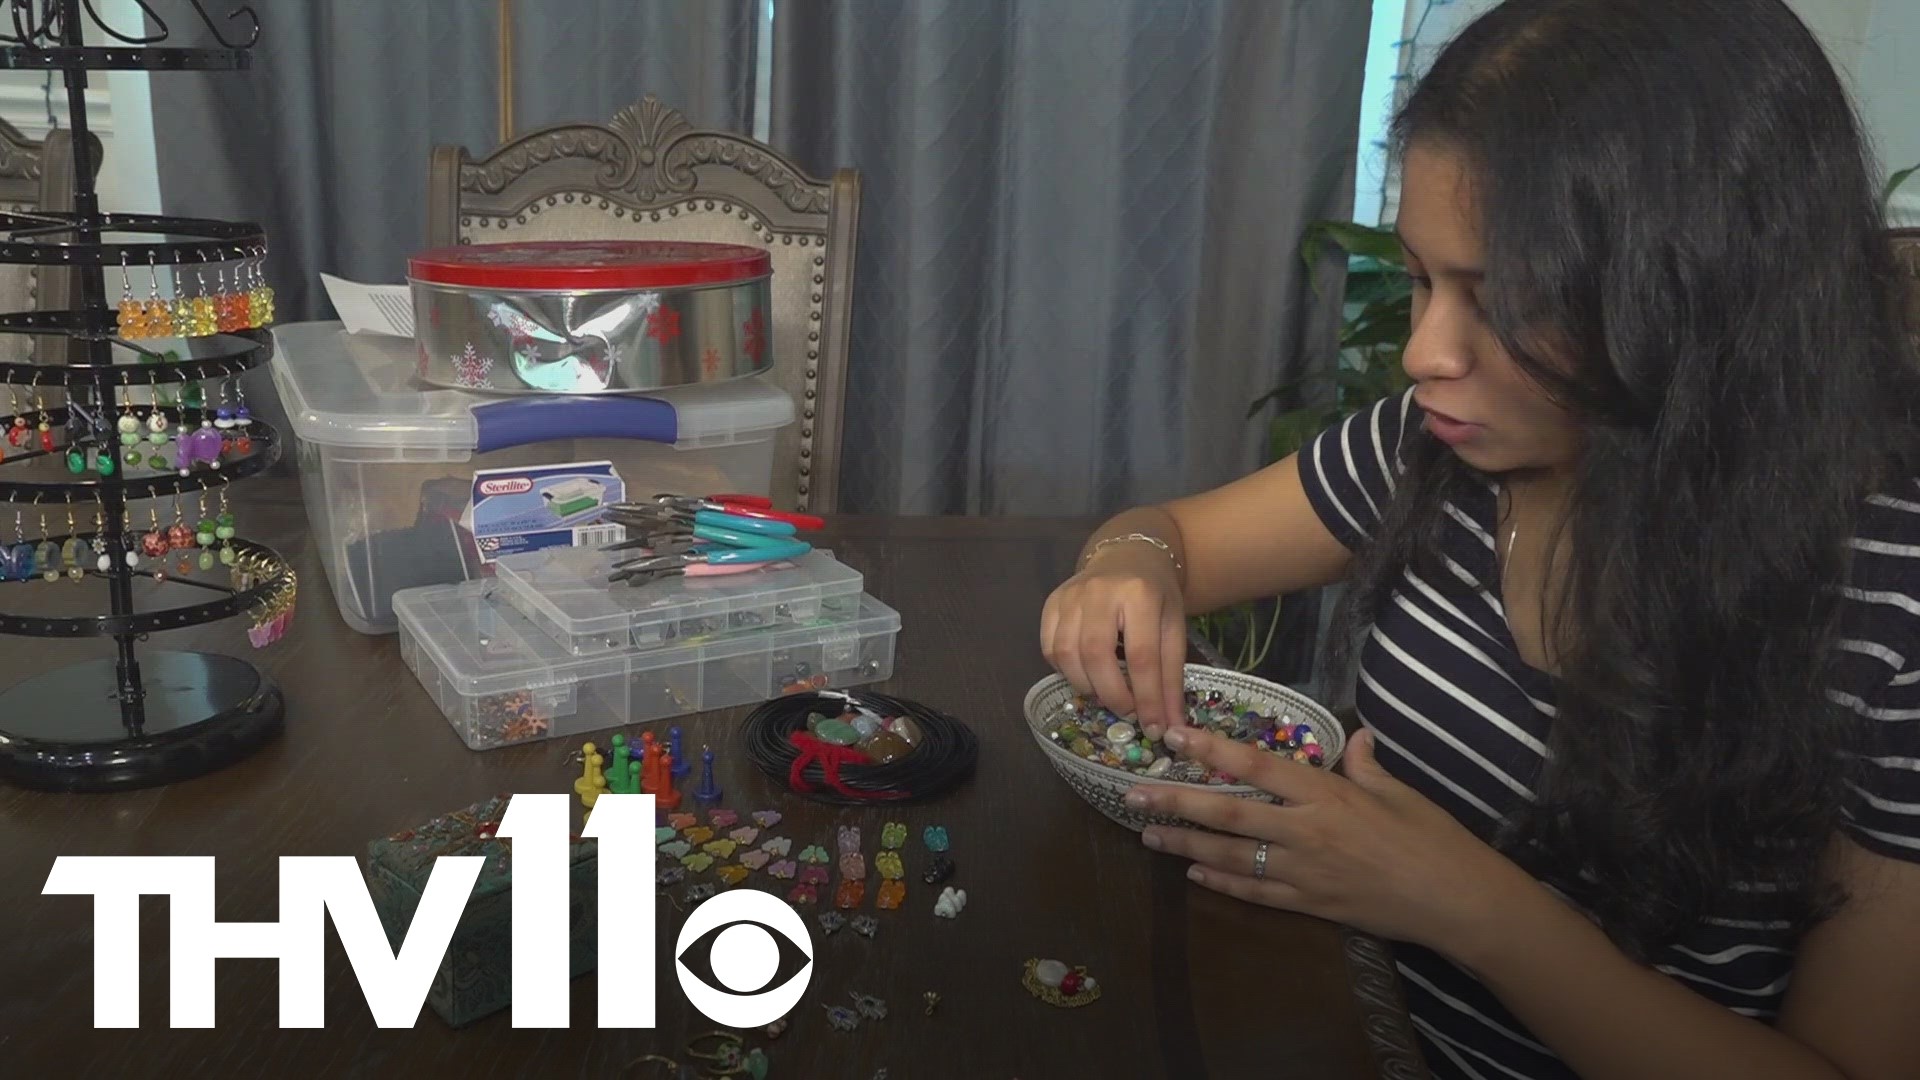 A 16-year-old in Little Rock Rock started making jewelry just three years ago, which led to her creating an online business and eventually her own non-profit.